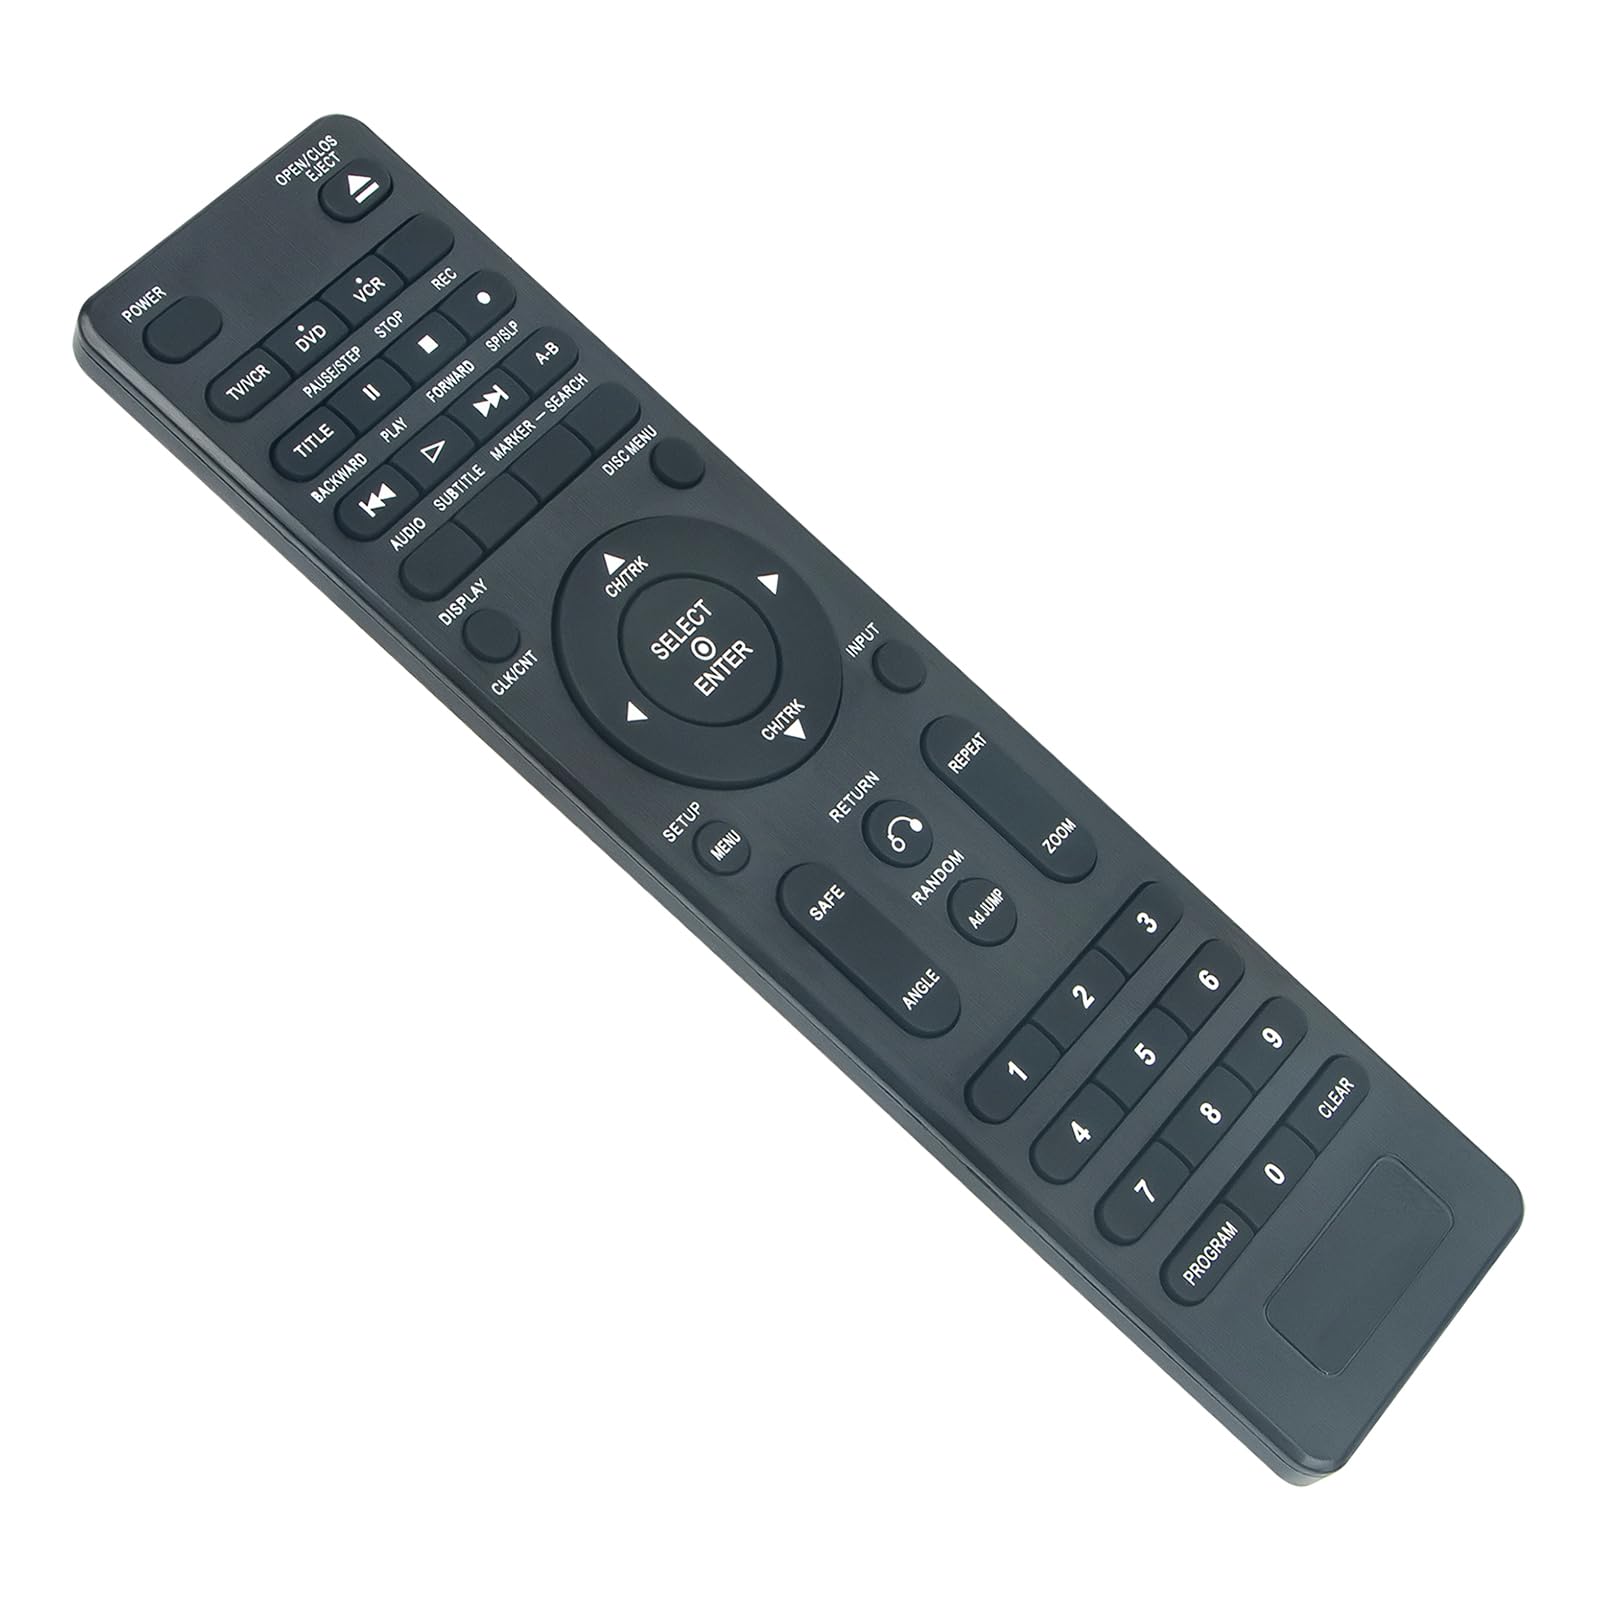 N108A New Replacement Remote Control fit for SANYO DVD VCR Combo Player DVW-5000 DVW-6100 DVW7000 DVW7100 DVW-6000